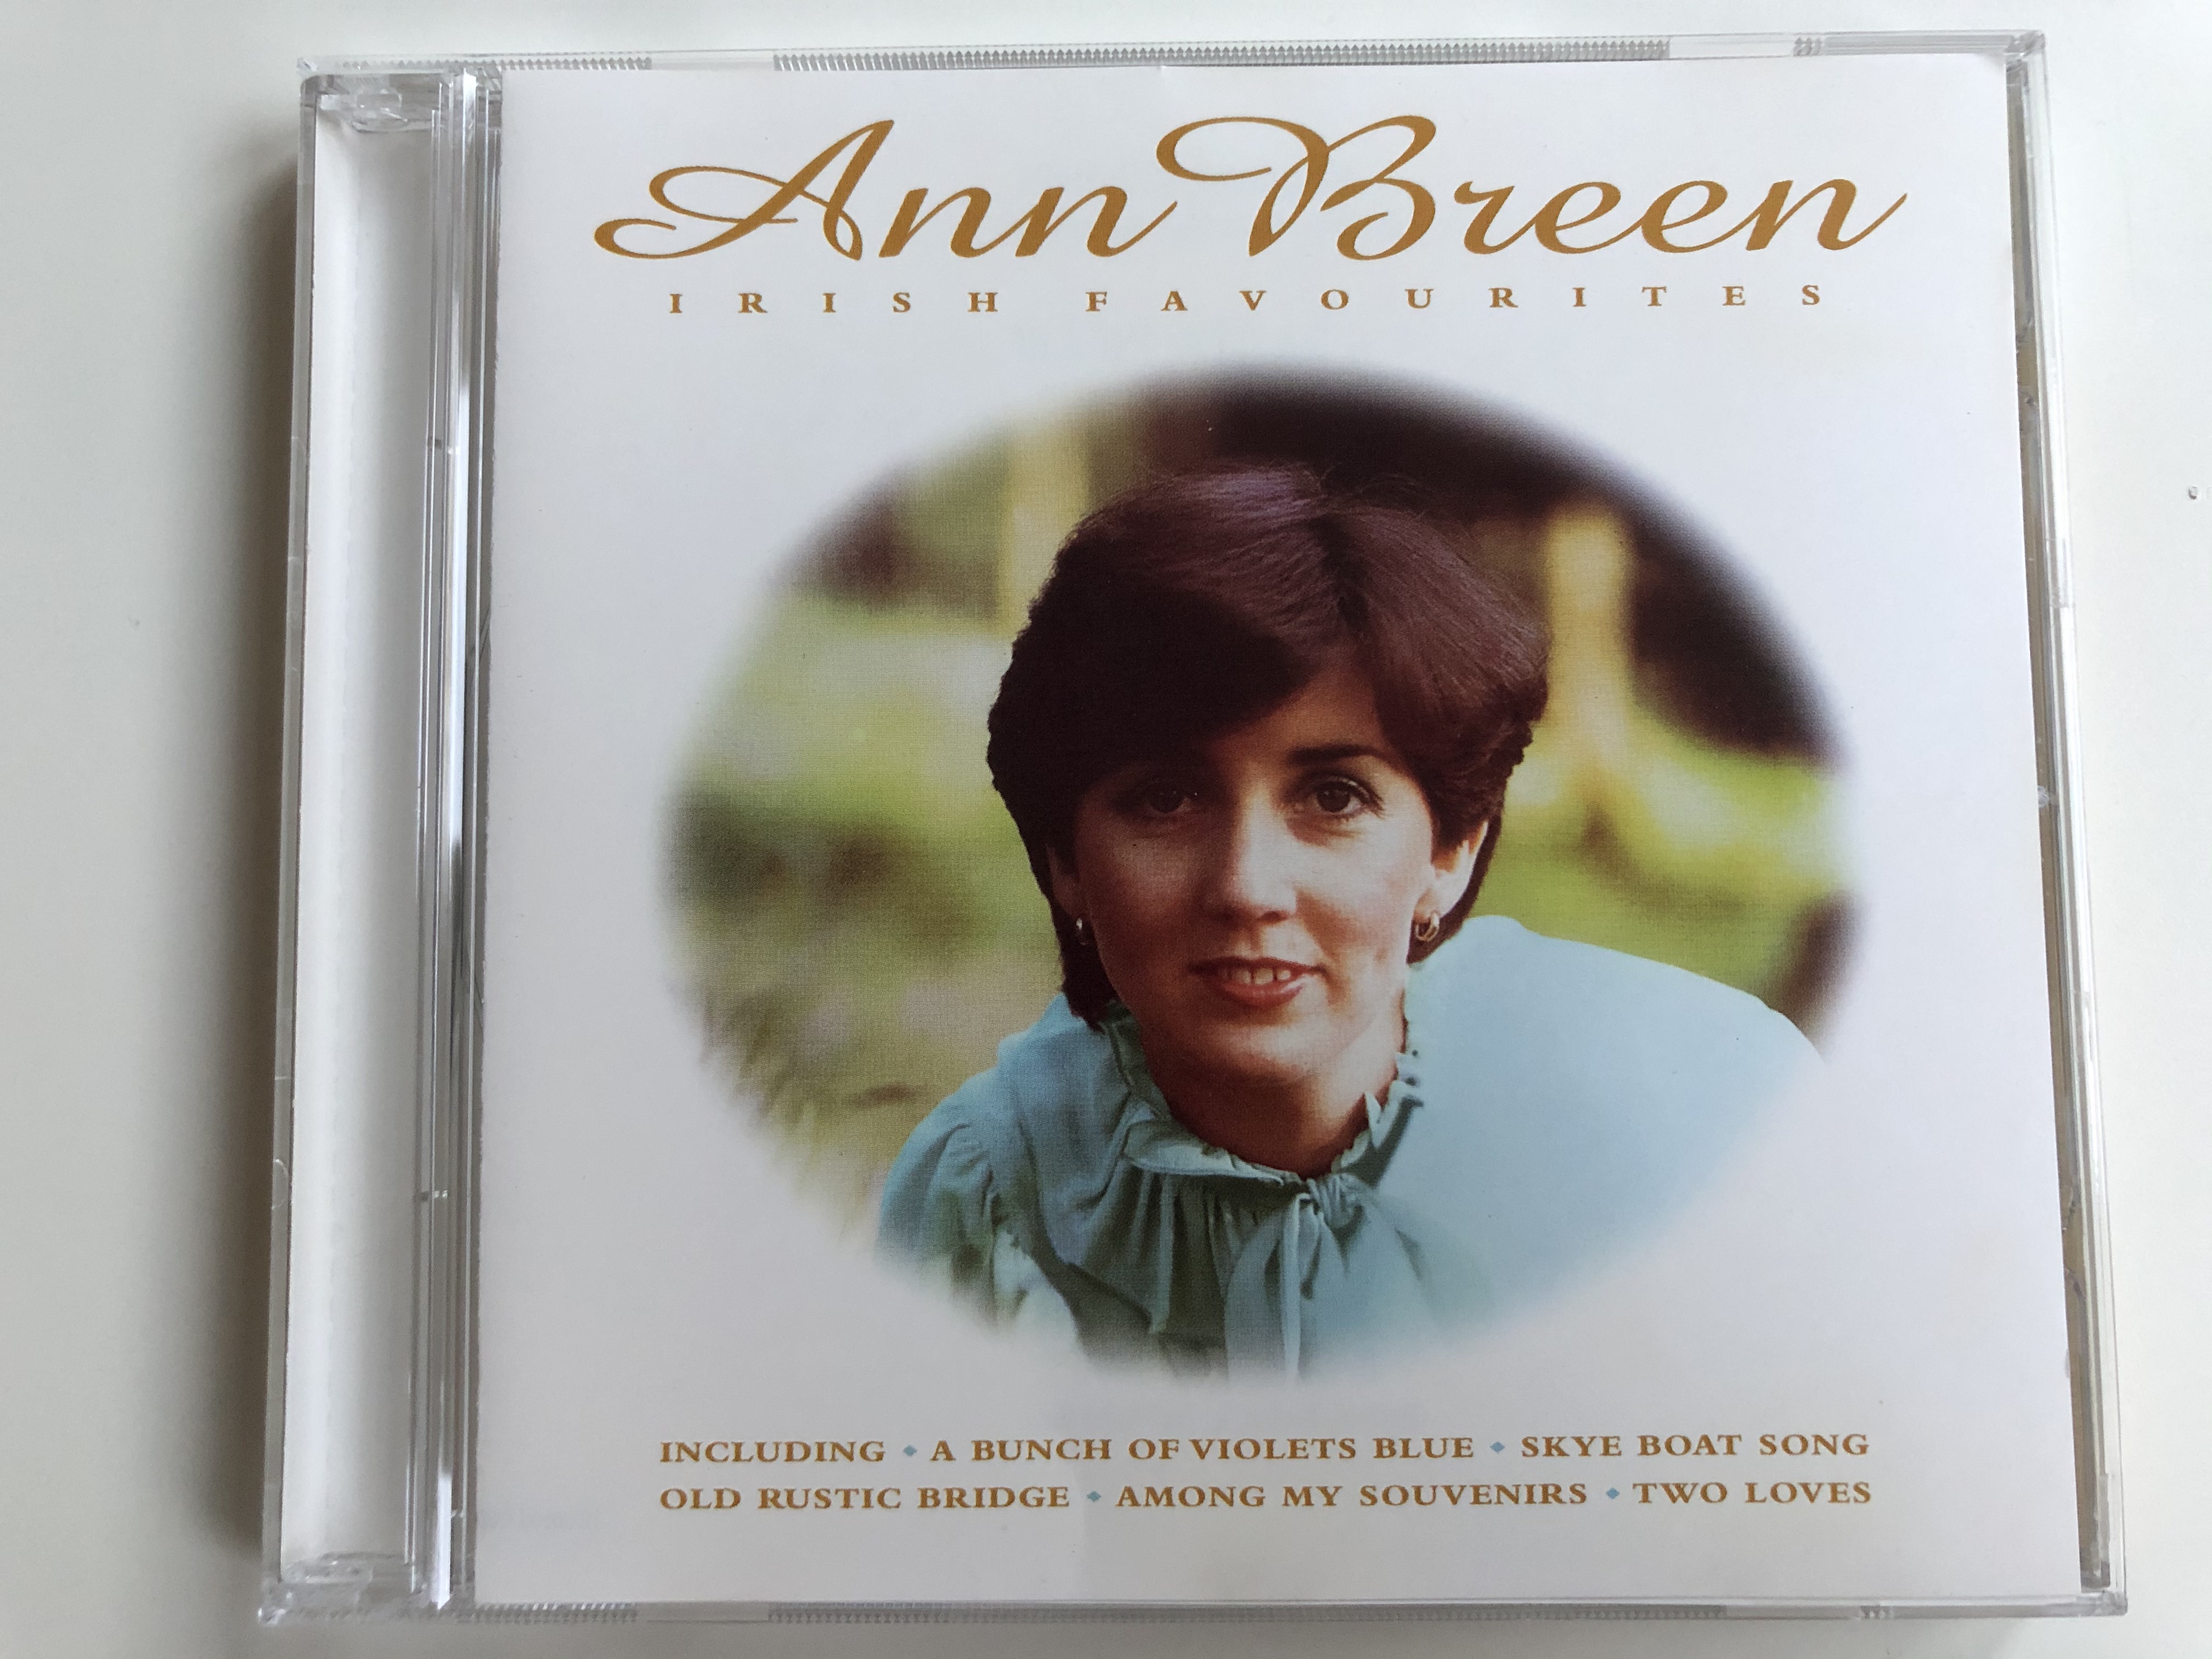 ann-breen-irish-favourites-including-a-bunch-of-violets-blue-skye-boat-song-old-rustic-bridge-among-my-souvenirs-two-loves-pegasus-audio-cd-1998-peg-cd-102-1-.jpg